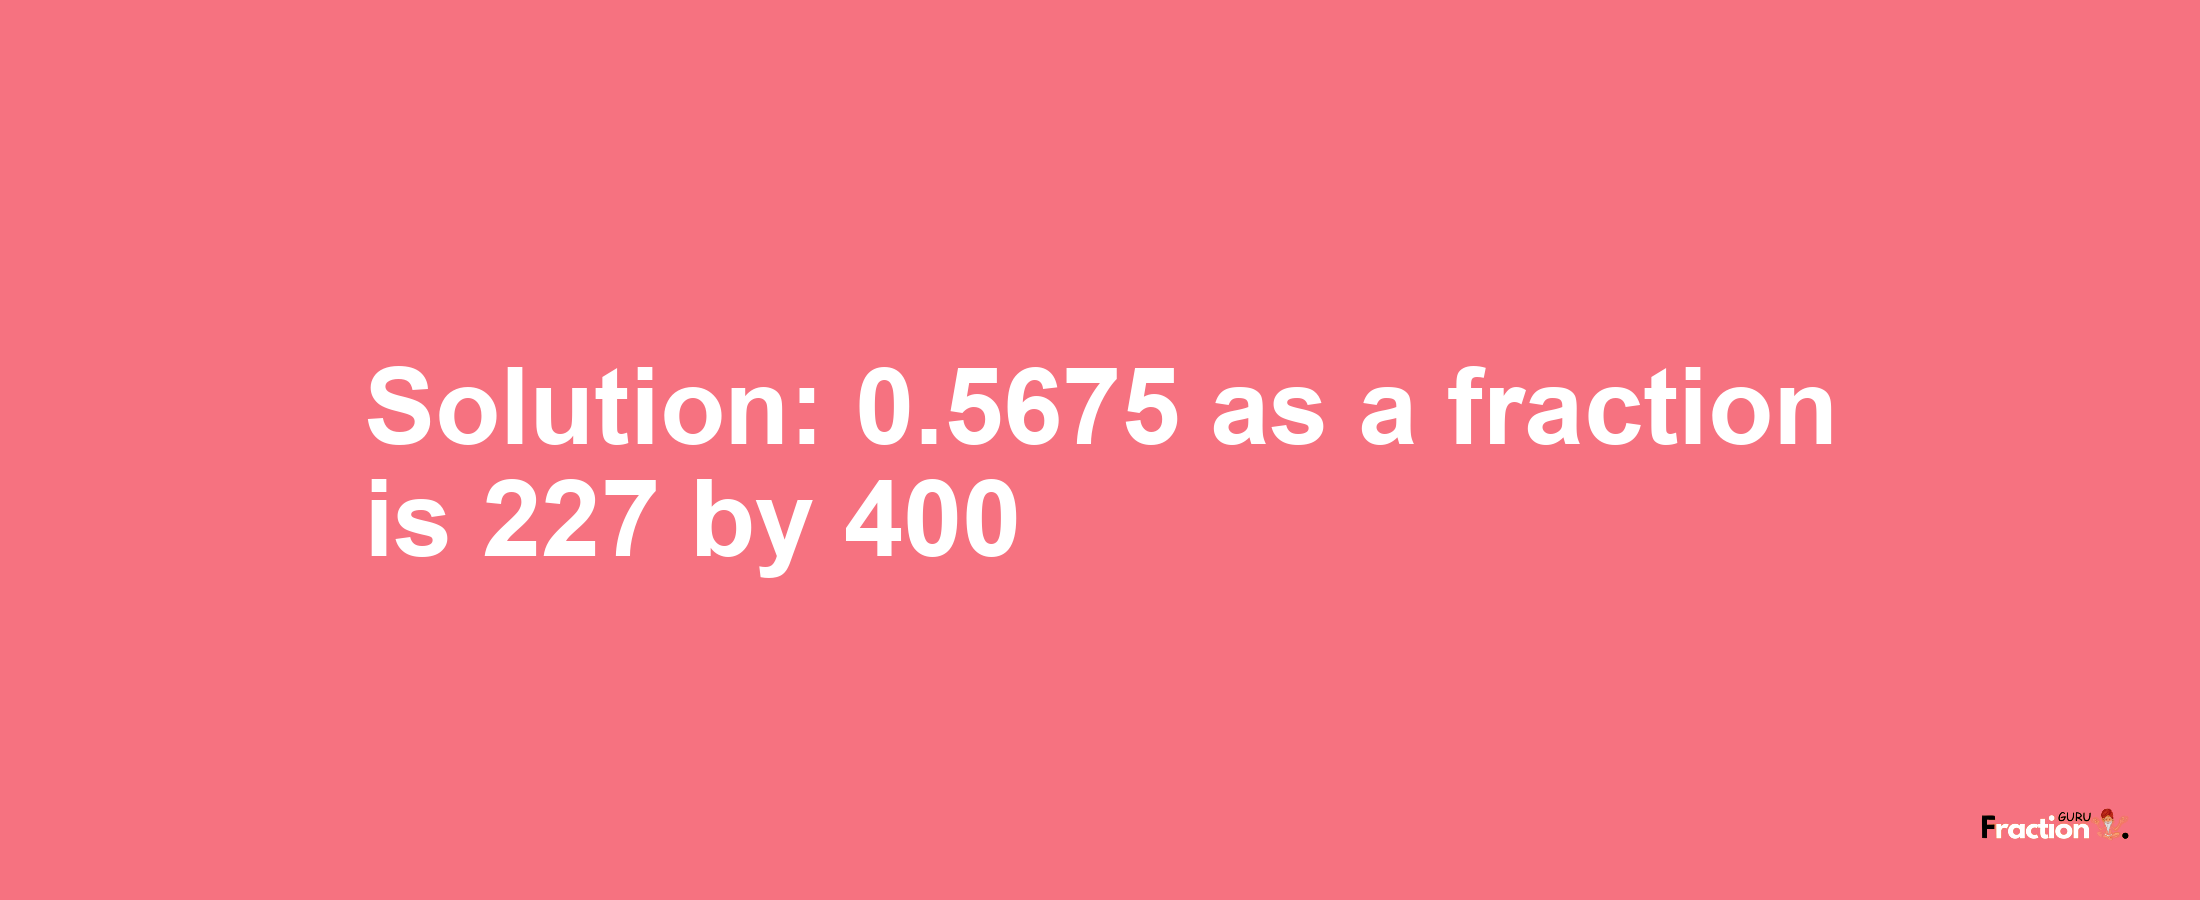 Solution:0.5675 as a fraction is 227/400